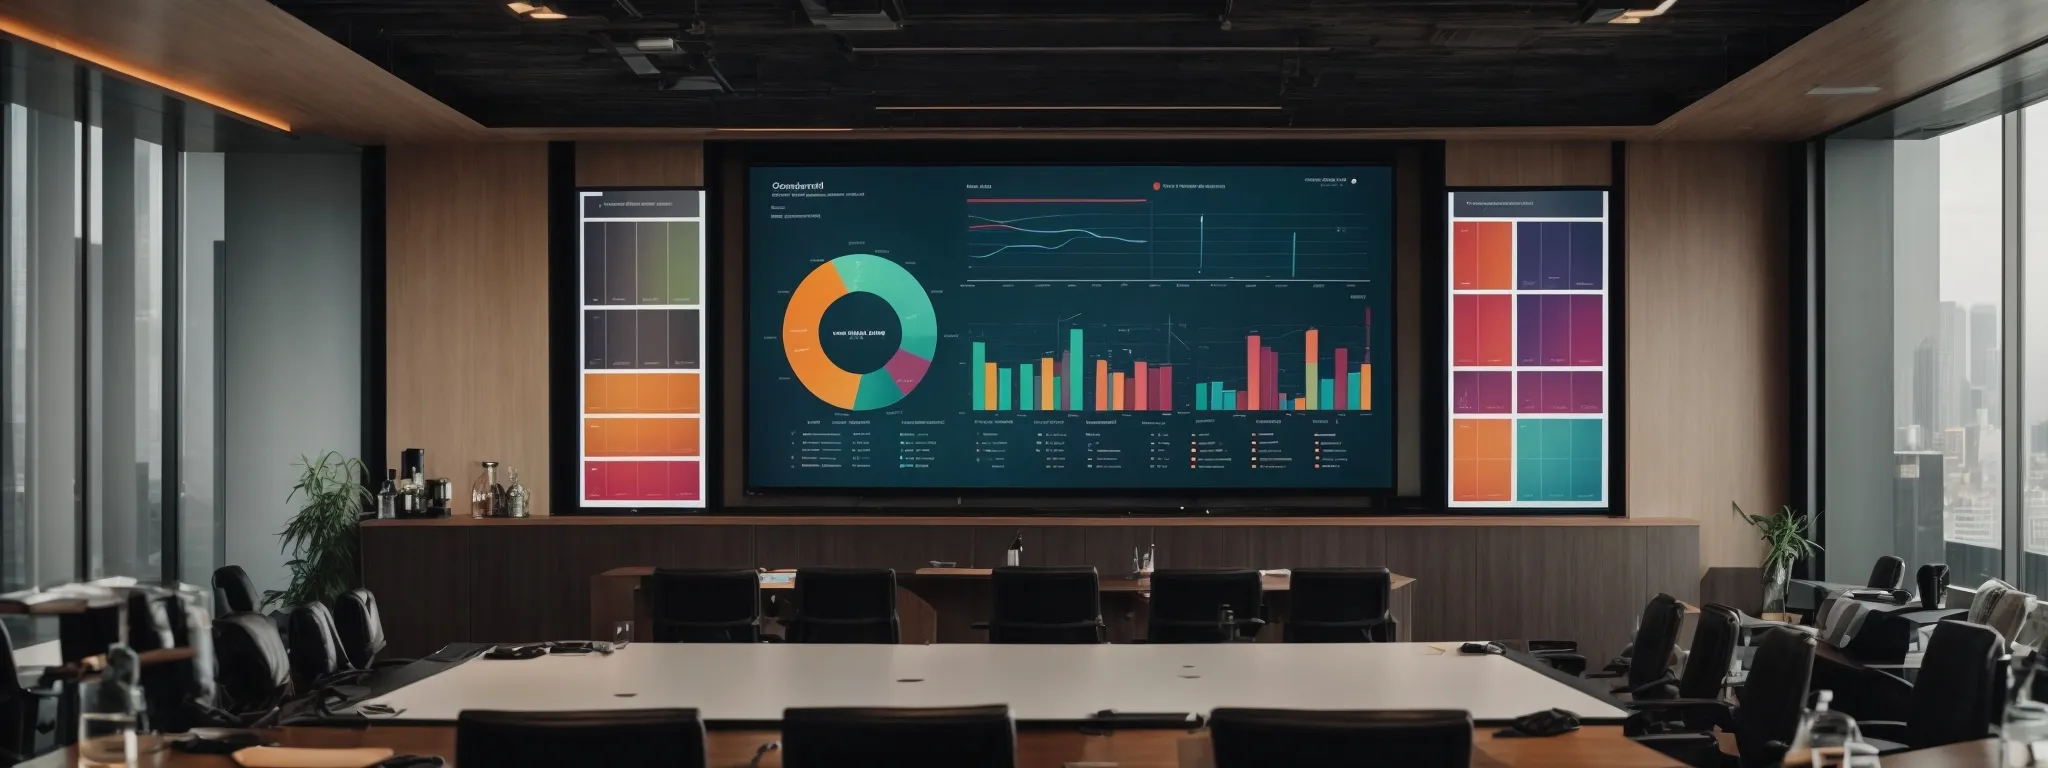 a conference room with a large screen displaying colorful graphs and pie charts during an seo strategy presentation.